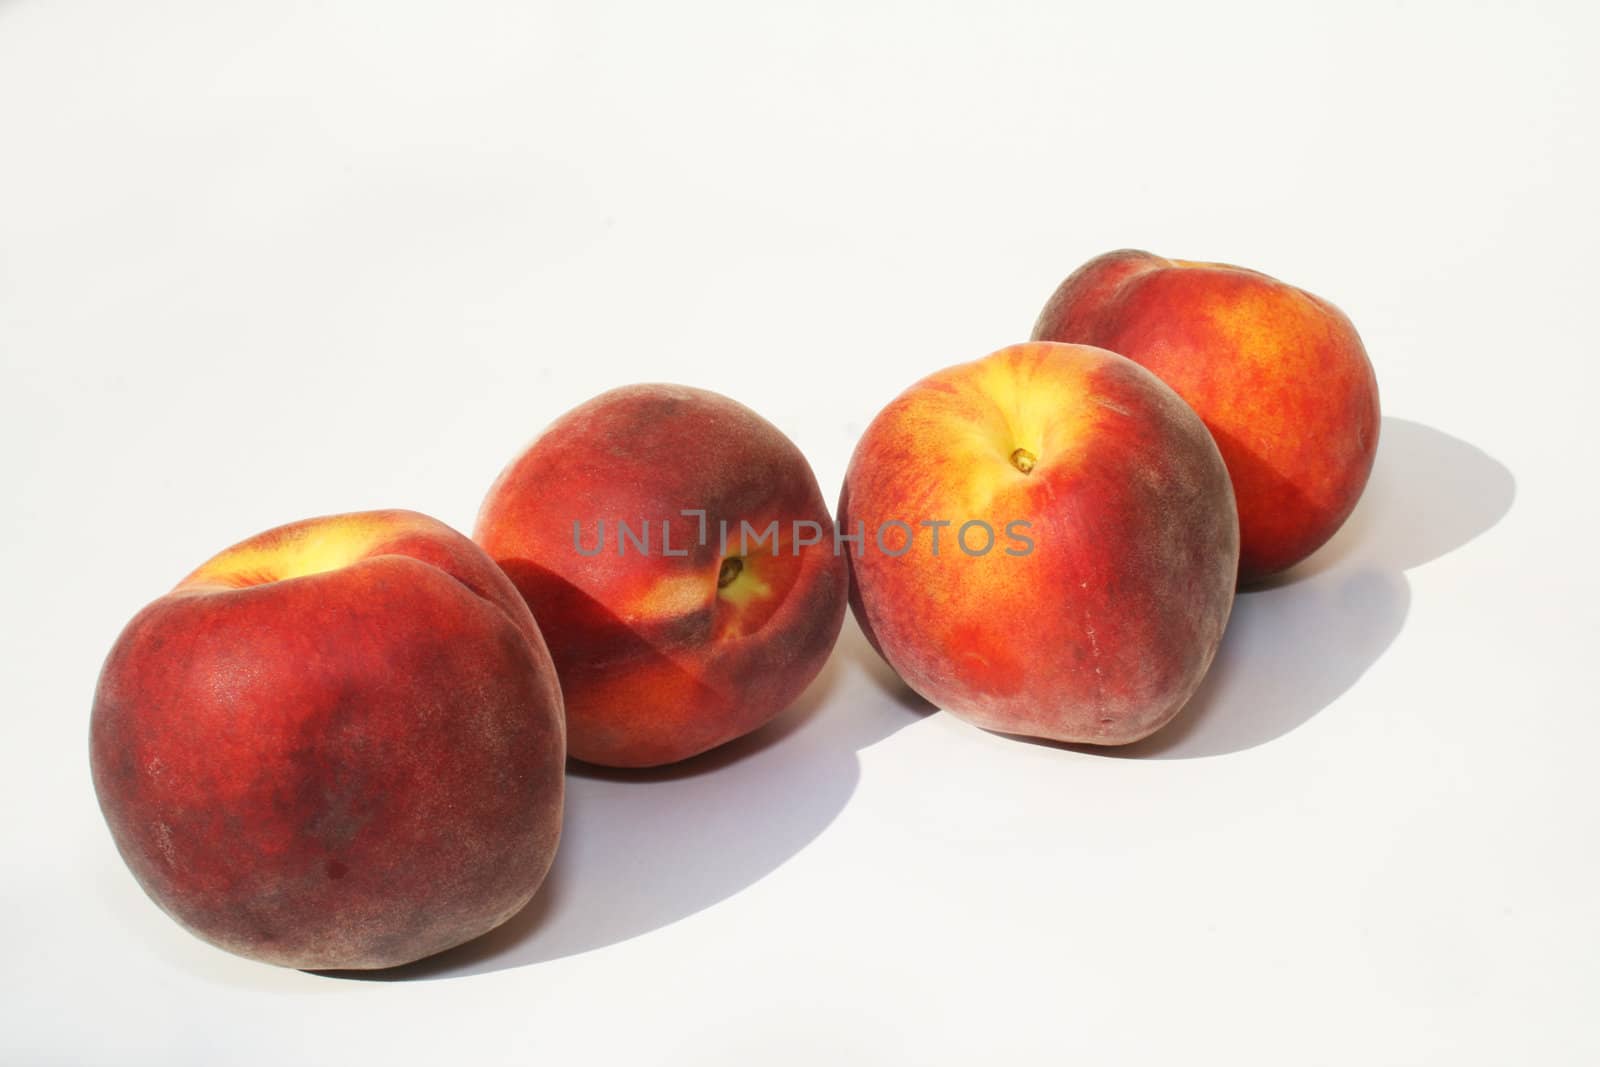 Group of peaches against white background